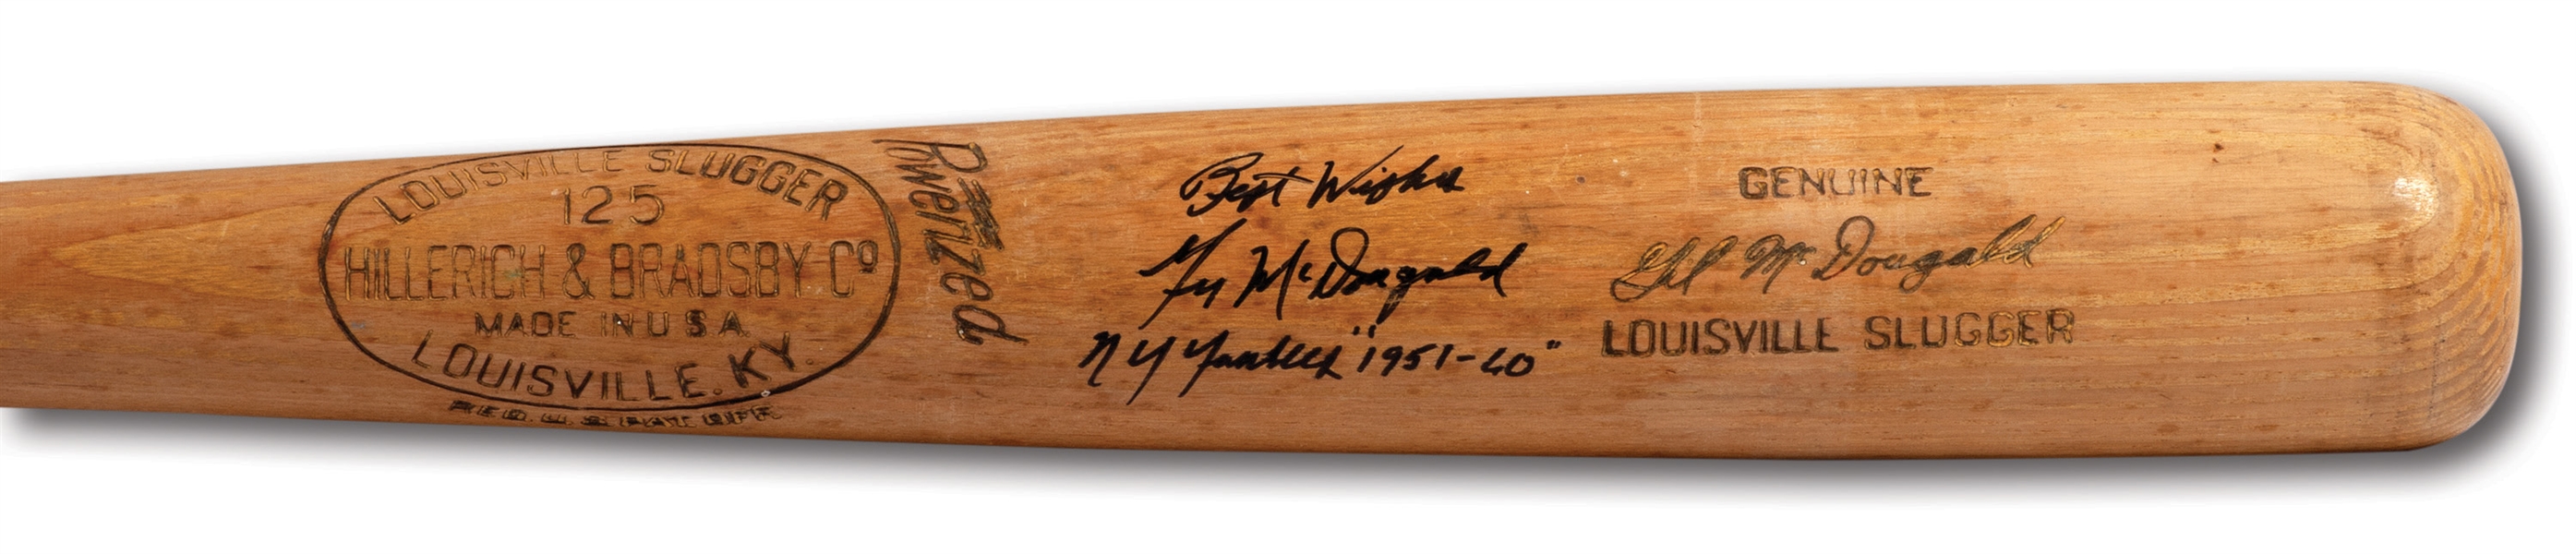 GIL MCDOUGALD AUTOGRAPHED 1951-58 HILLERICH & BRADSBY PROFESSIONAL MODEL GAME USED BAT (PSA/DNA GU 6)